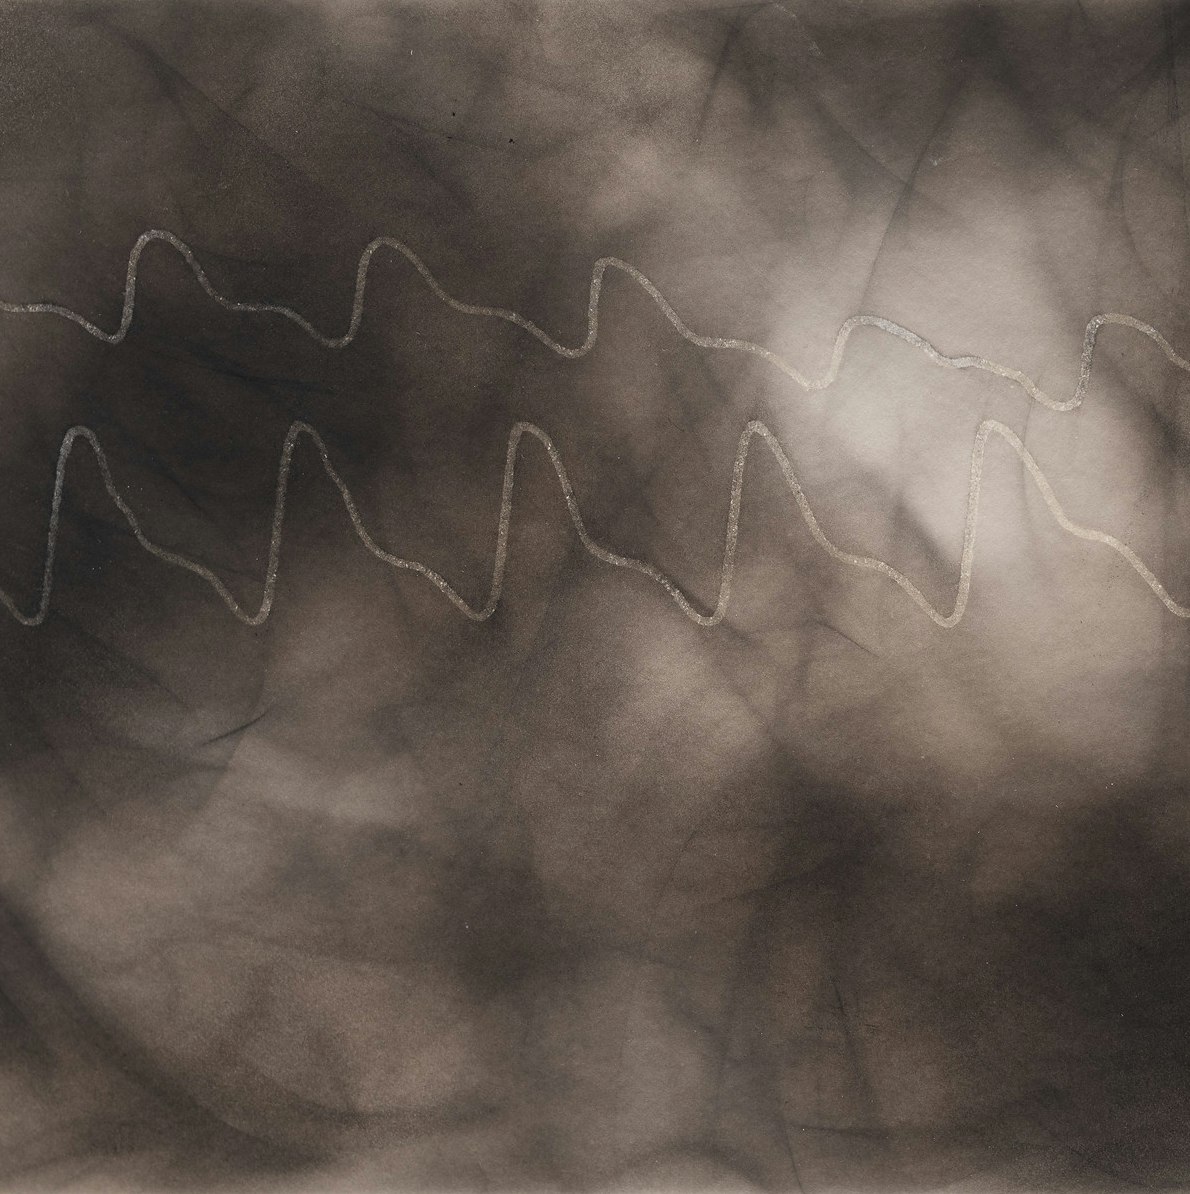 Black, white and sepia toned, watercolor image with a design that looks like 2 electrocardiograms, one right below the other.